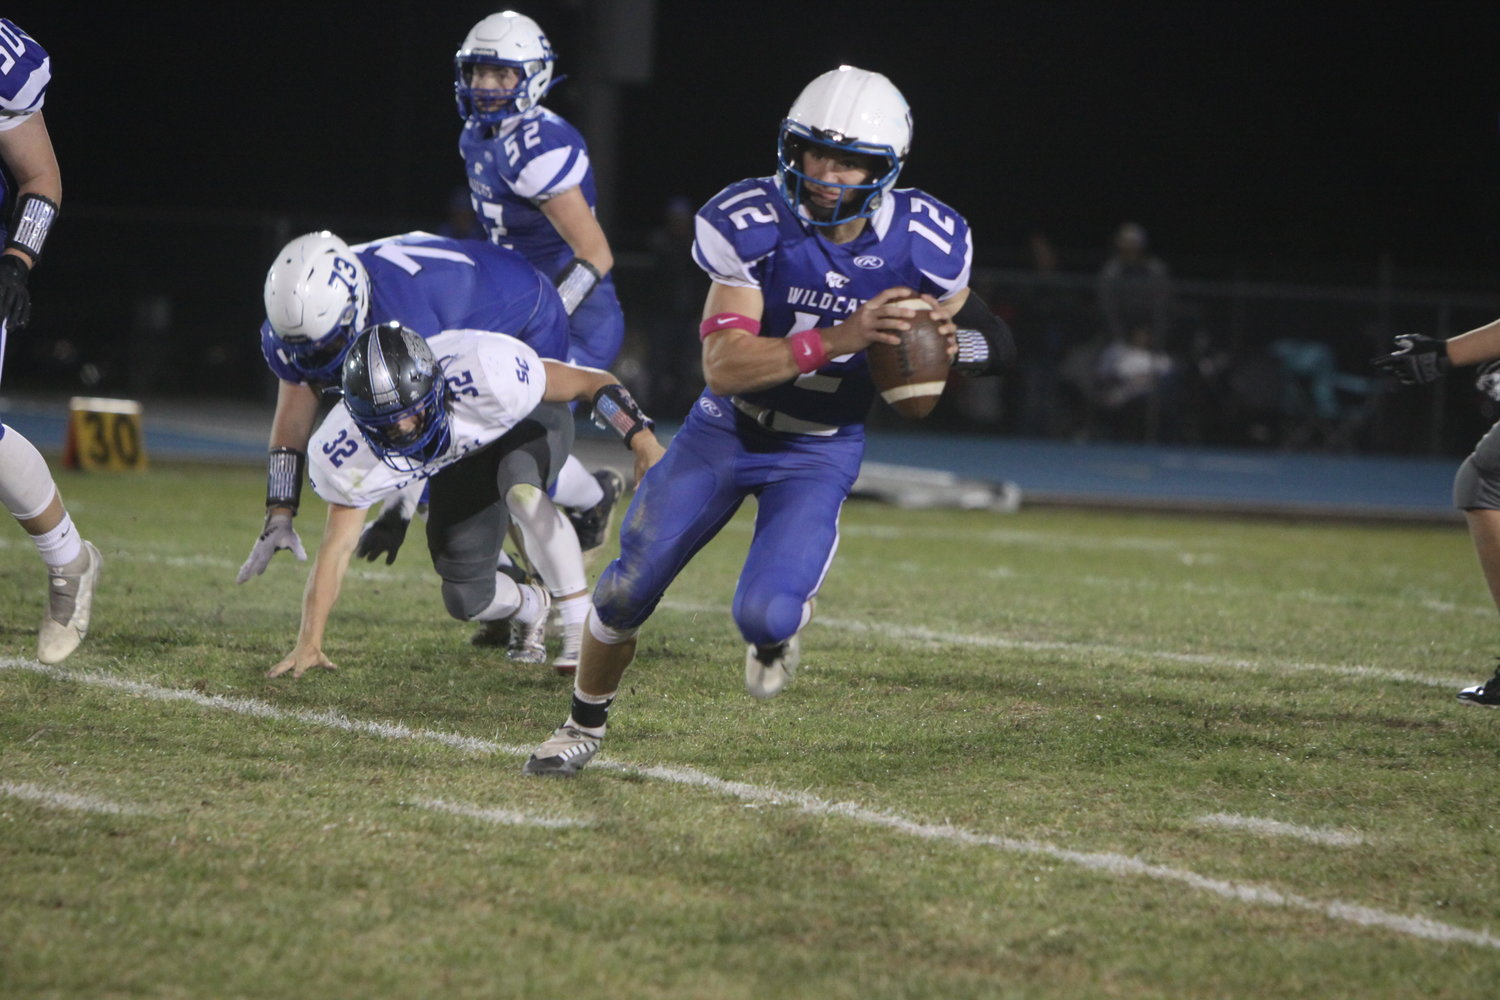 Montgomery County senior quarterback Adam Czerniewski scored a touchdown in his team’s 33-12 loss to Clark County in a Class 2, District 7 quarterfinal game on Oct. 28. The Wildcats finish their season at 2-8.